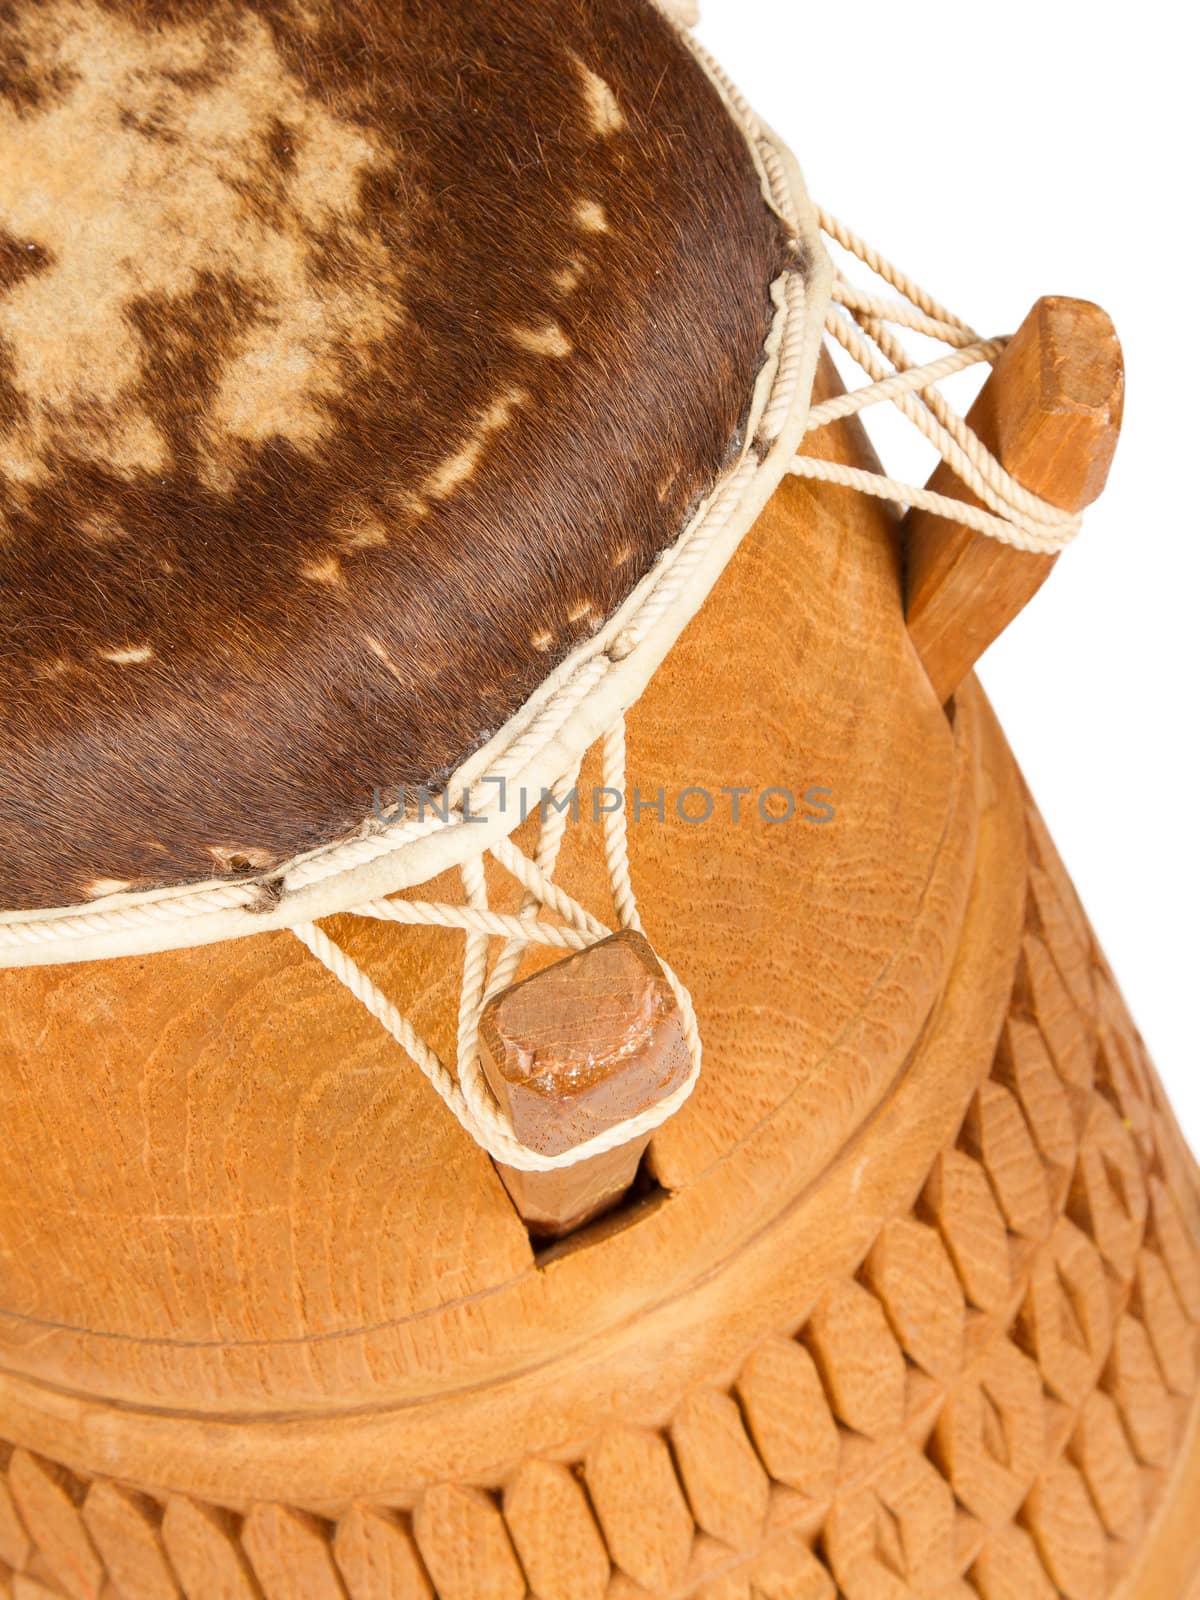 Djembe, Surinam percussion, handmade wooden drum with goat skin, ethnic musical instrument of carved wood and leather membrane, isolated